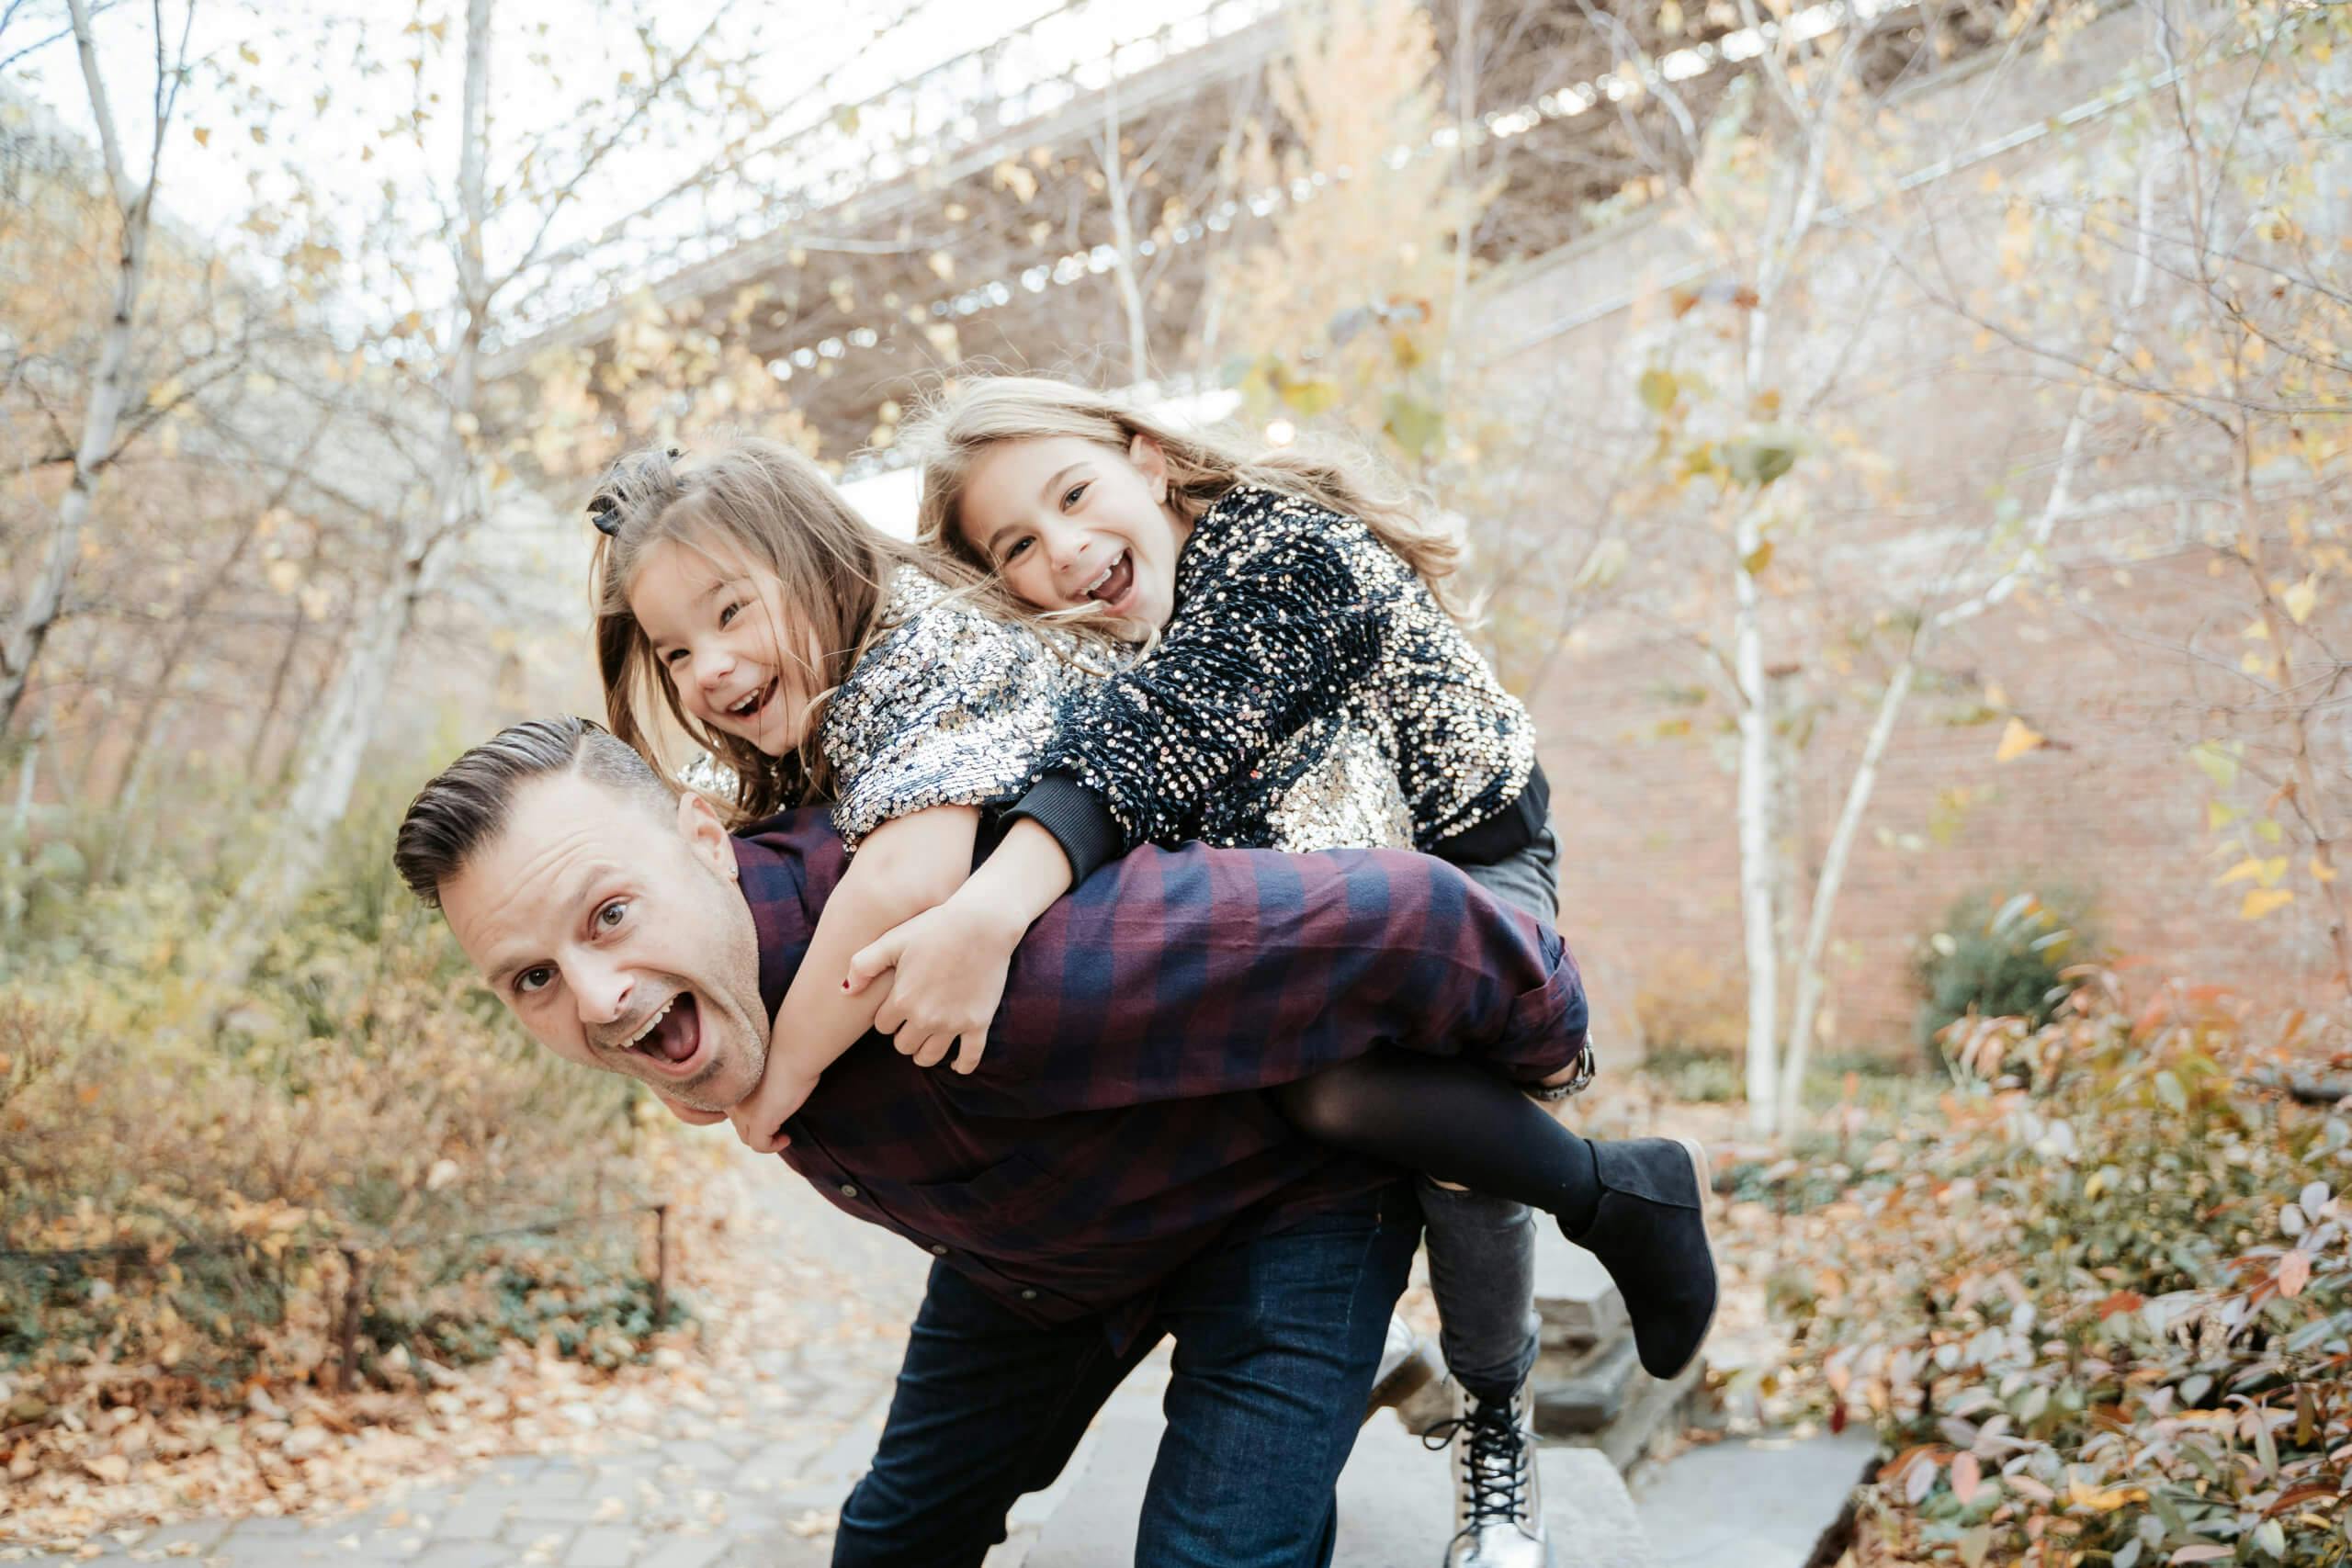 A man giving two young girls piggyback rides in a playful autumn setting